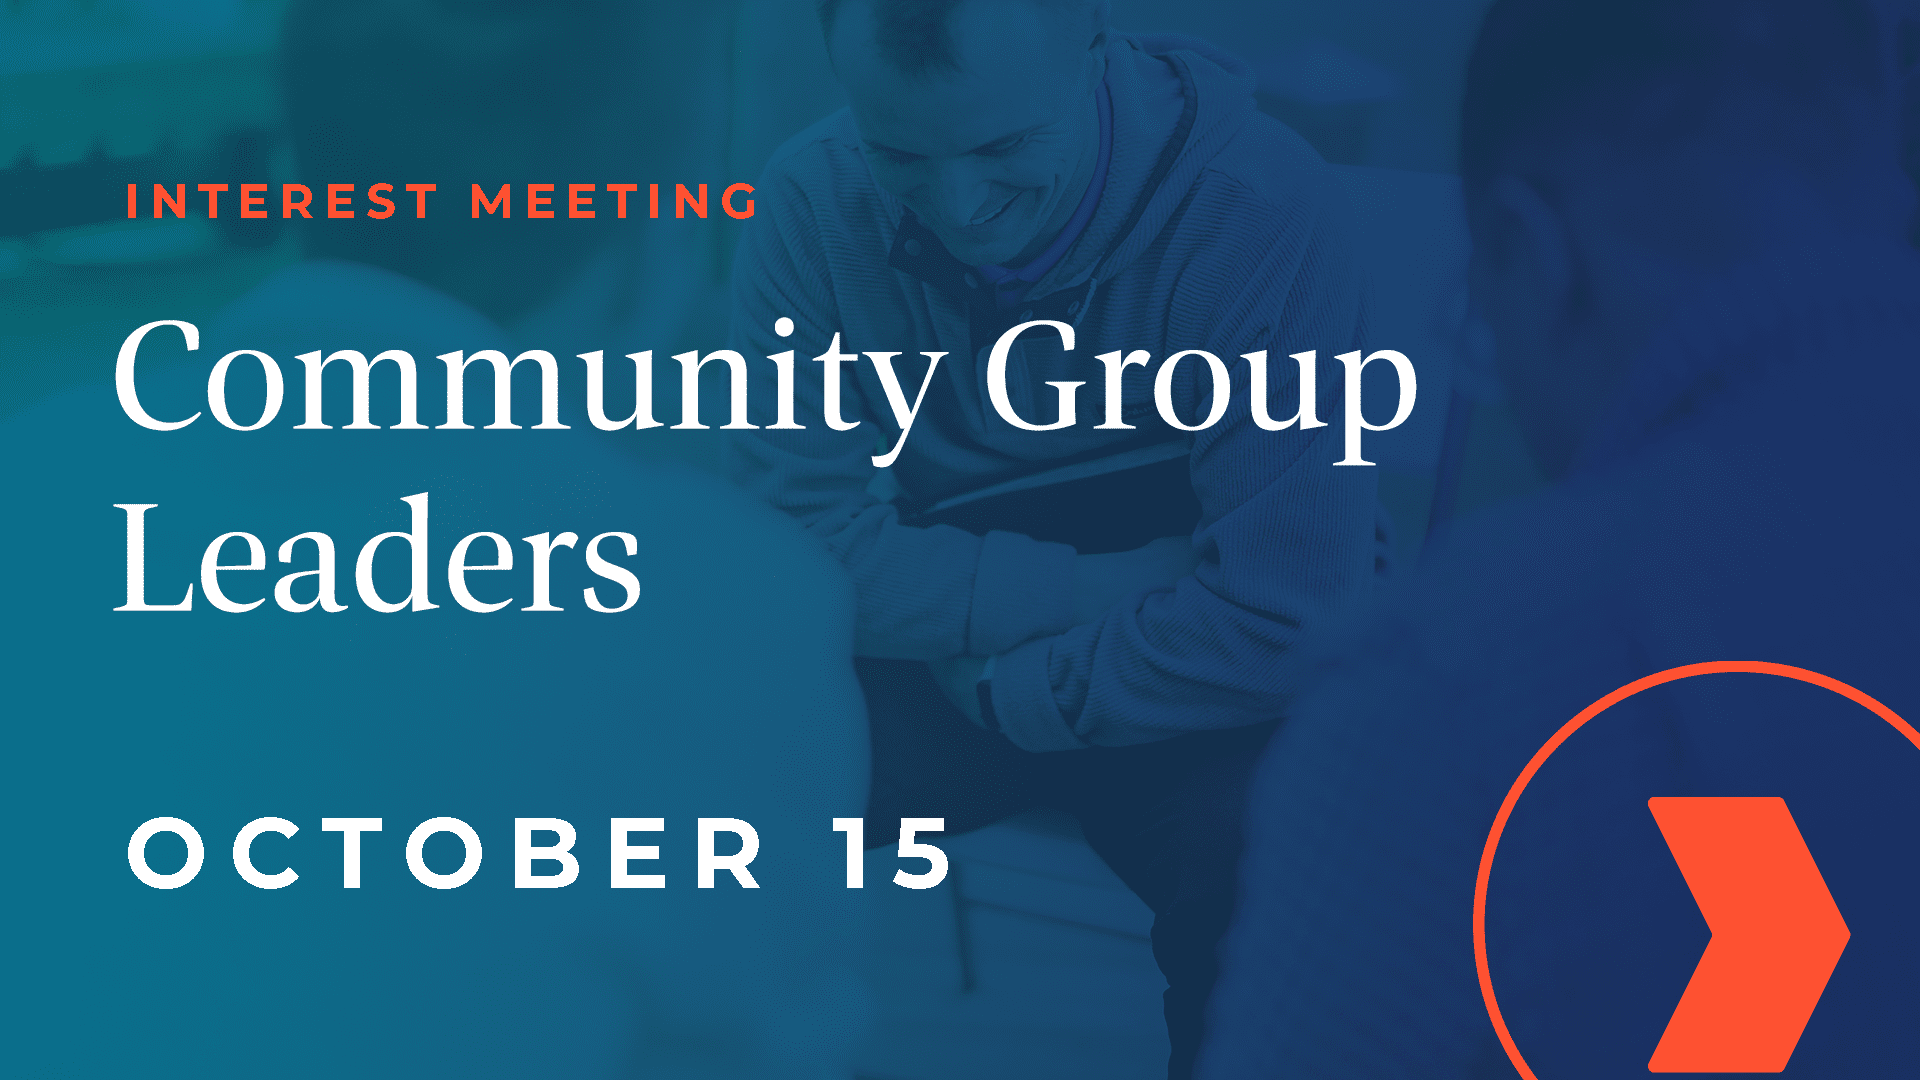 New Community Group Leader Interest Meeting - Community Group Leaders Interest Meeting